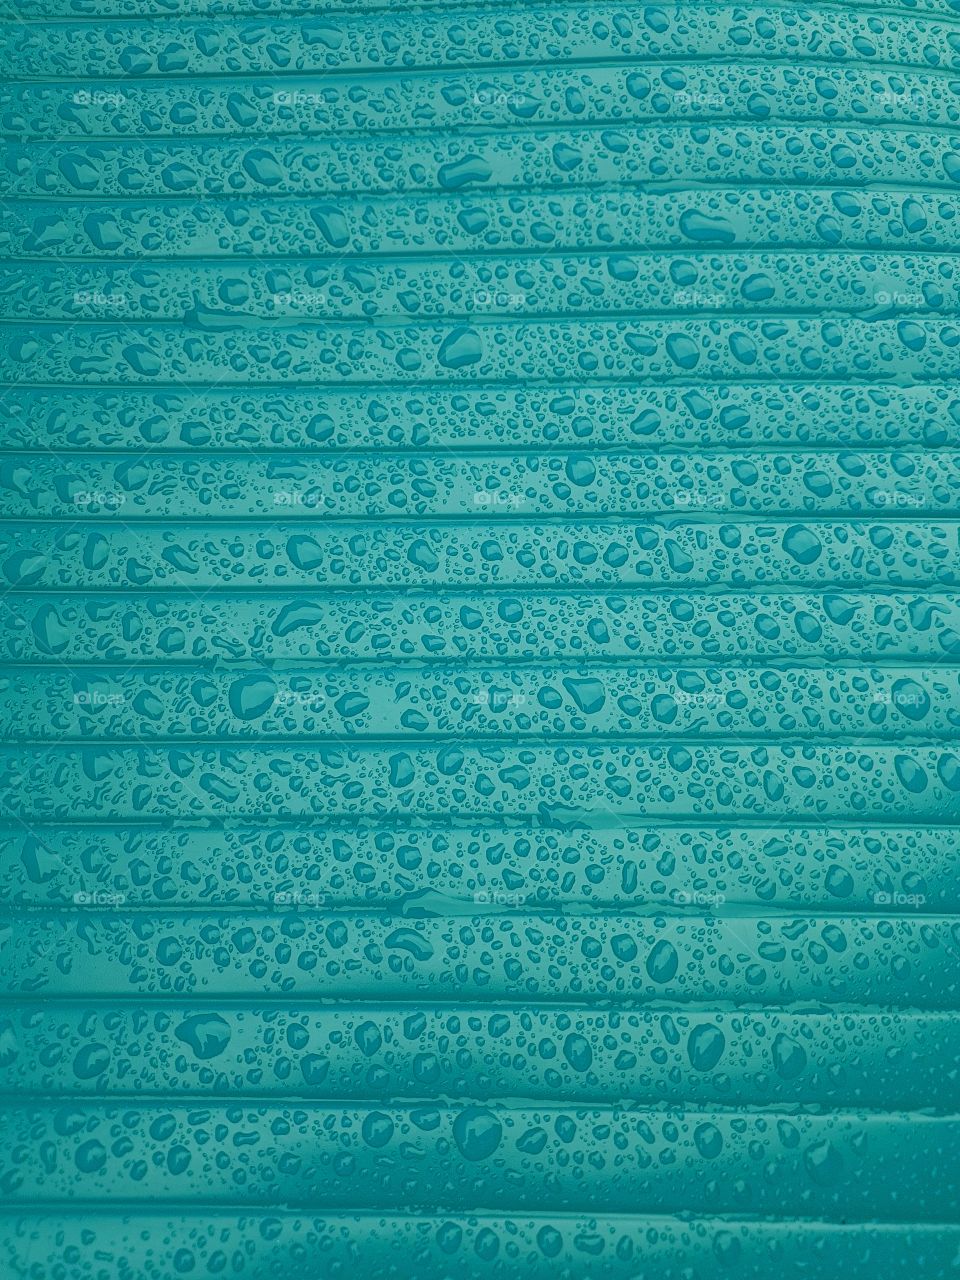 Close up of water droplets on a wet shiny plastic surface turquoise blue green with horizontale lines parallele